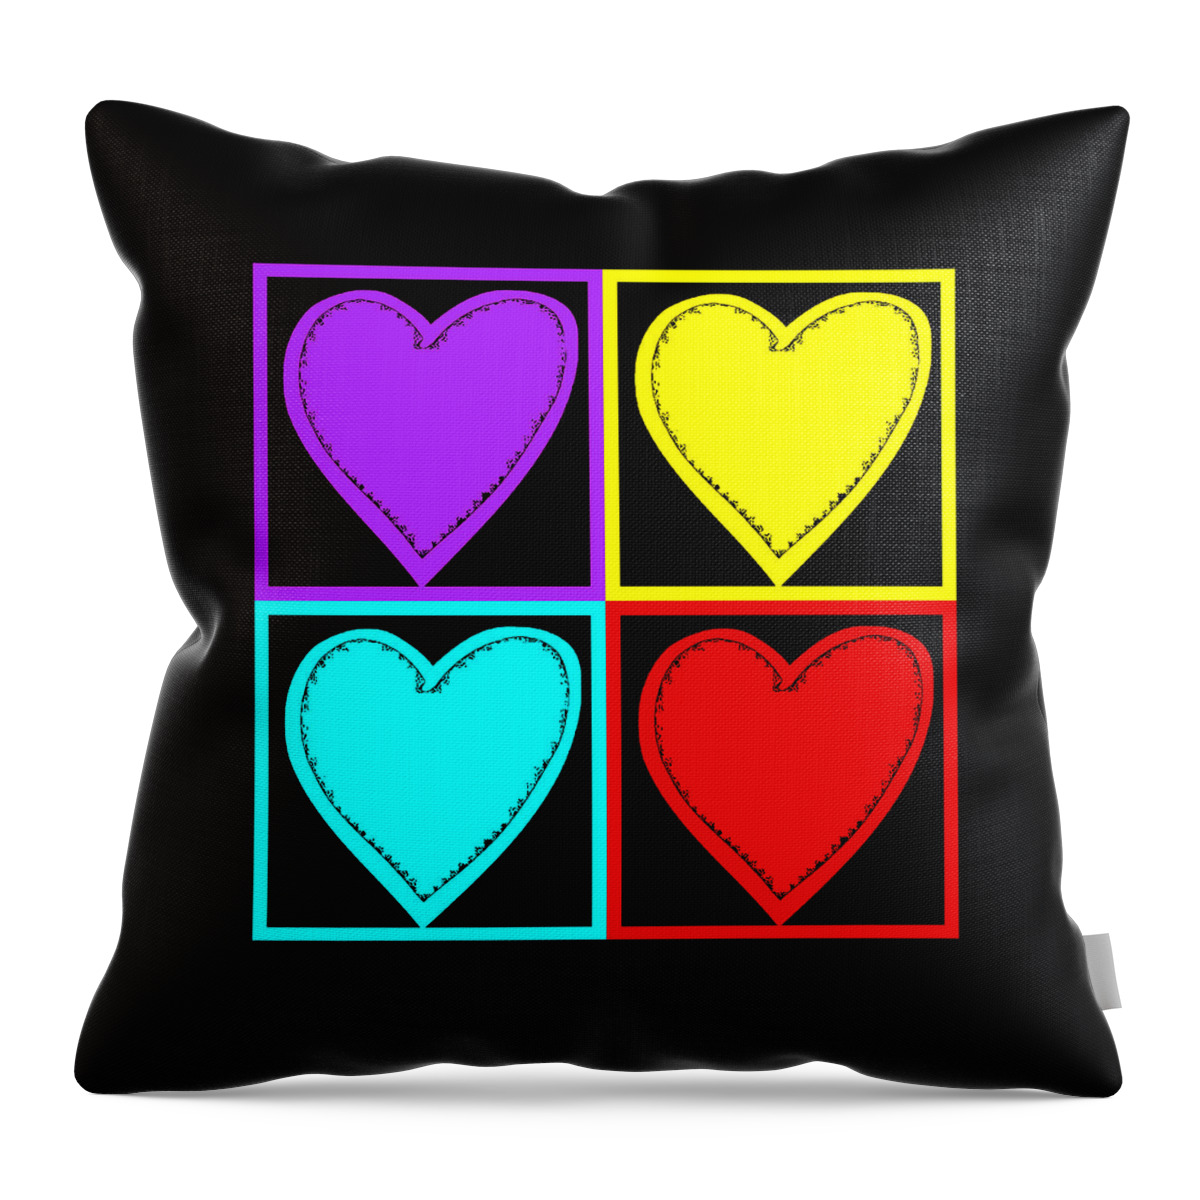 Heart Throw Pillow featuring the digital art Big Hearts I by Marianne Campolongo